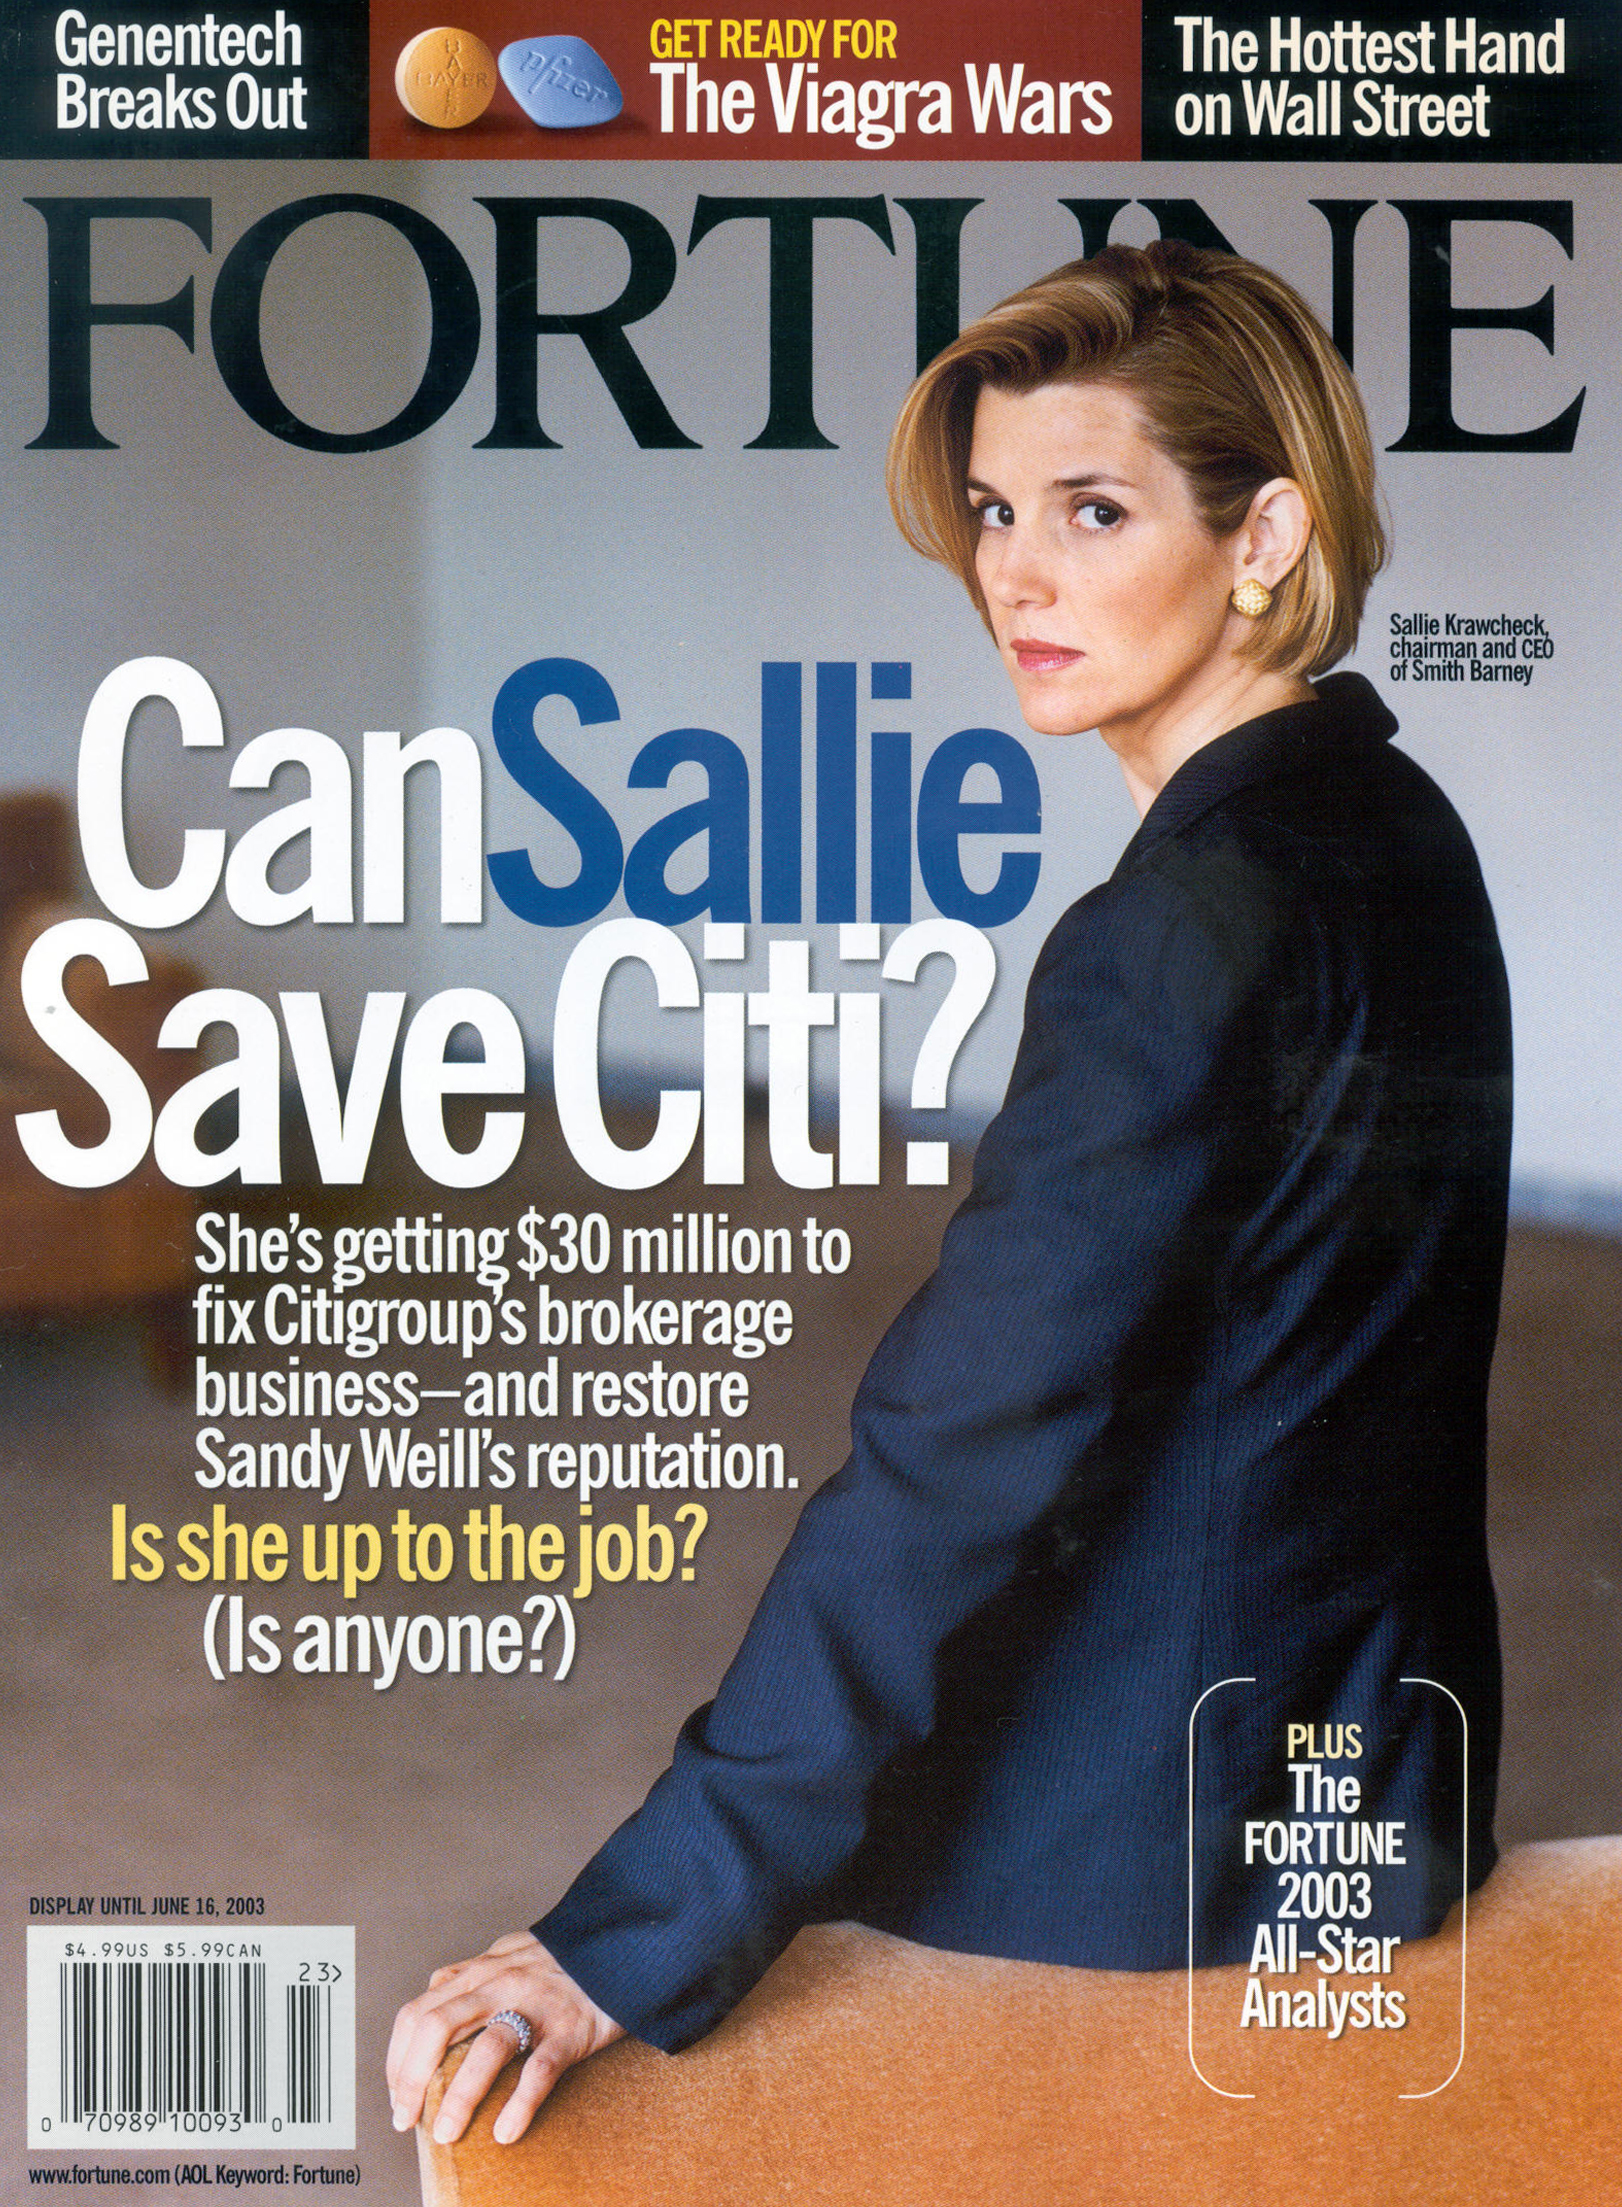 FORTUNE COVER PAGE.jpg